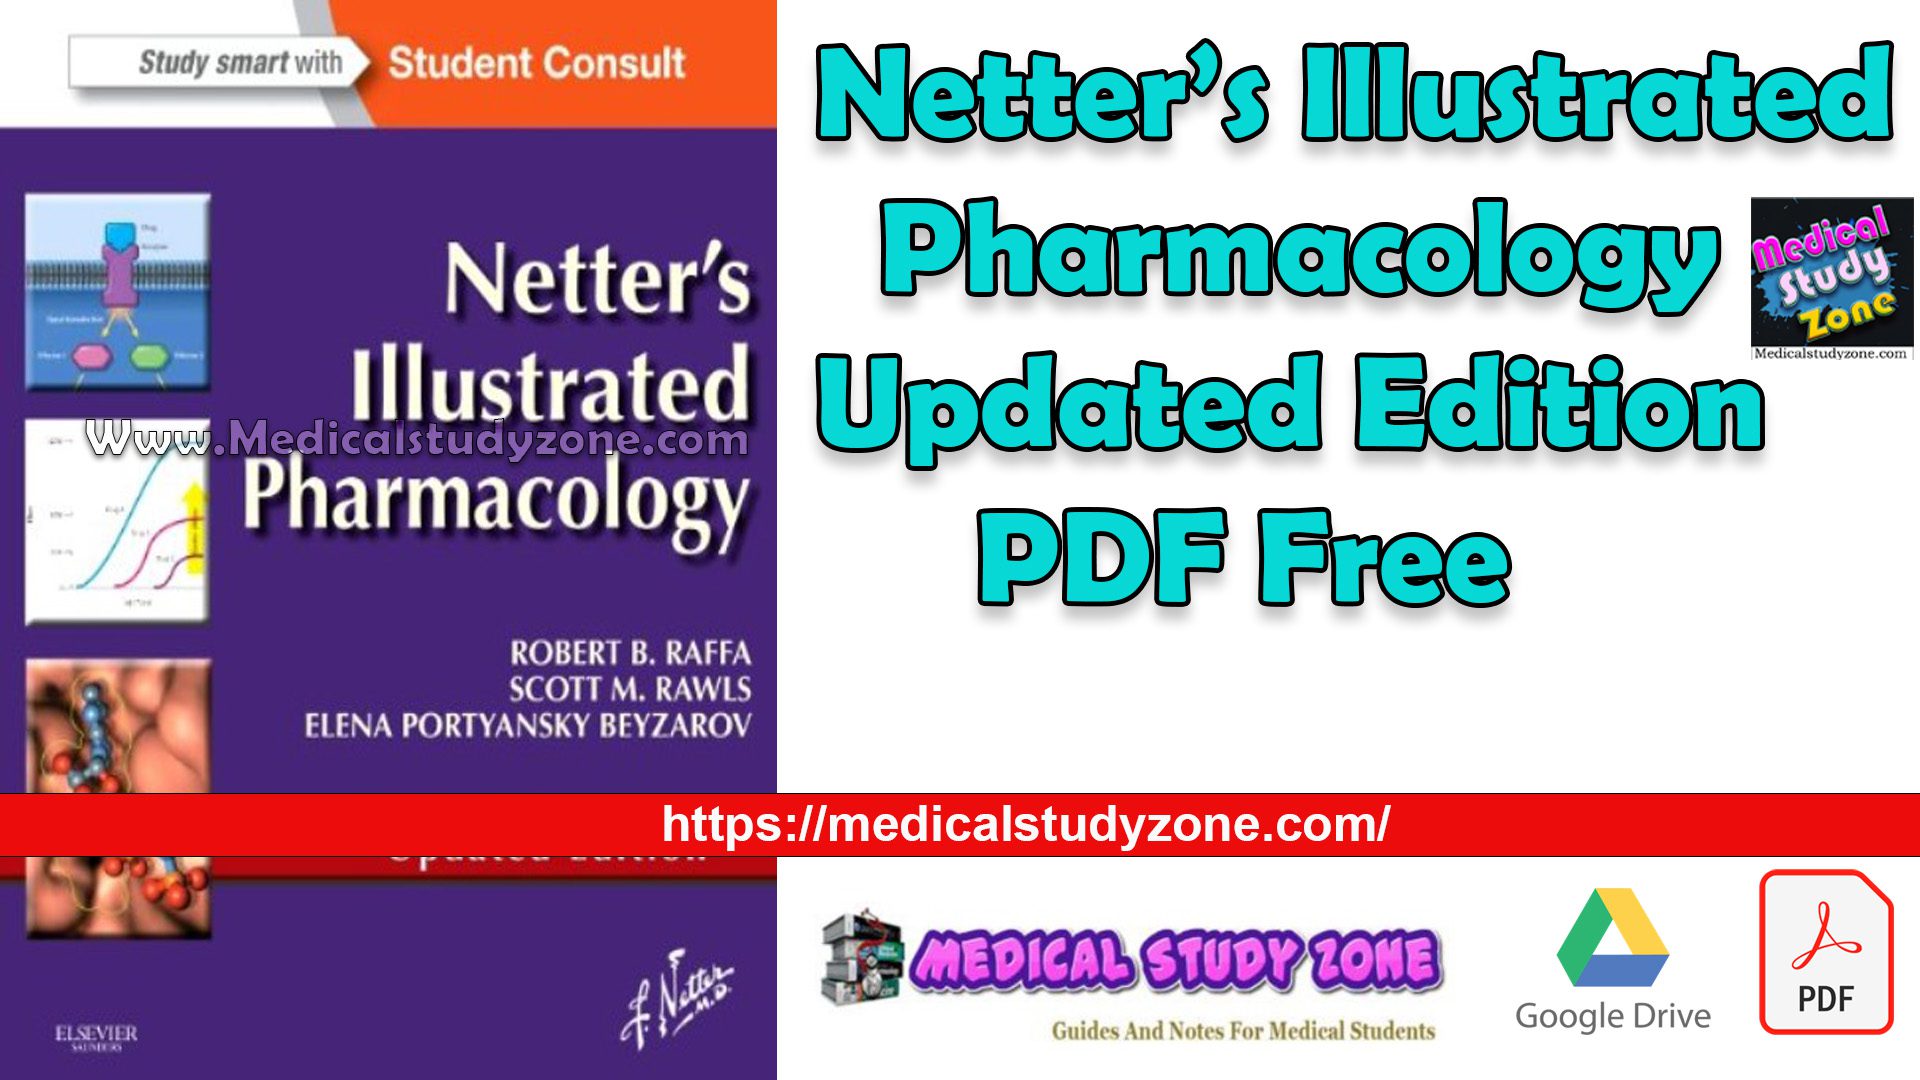 netters illustrated pharmacology download